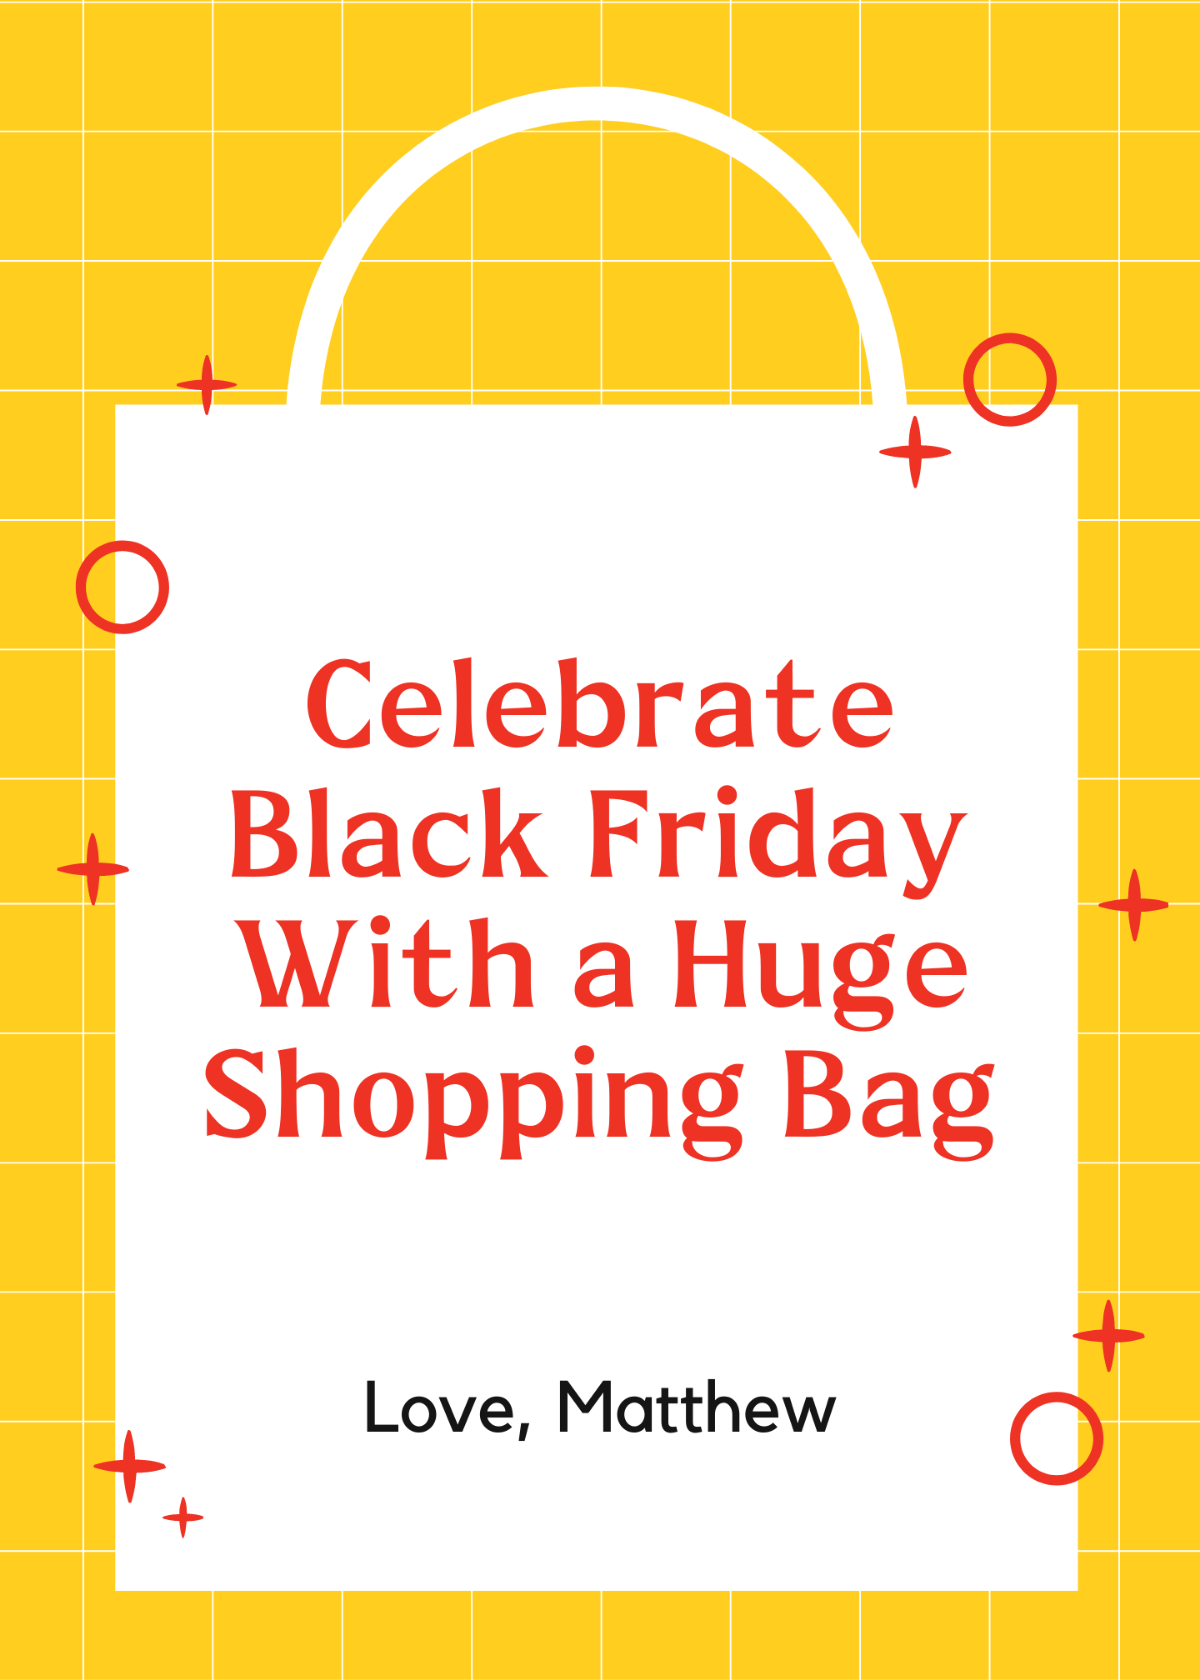 Happy Black Friday Greeting Card Template